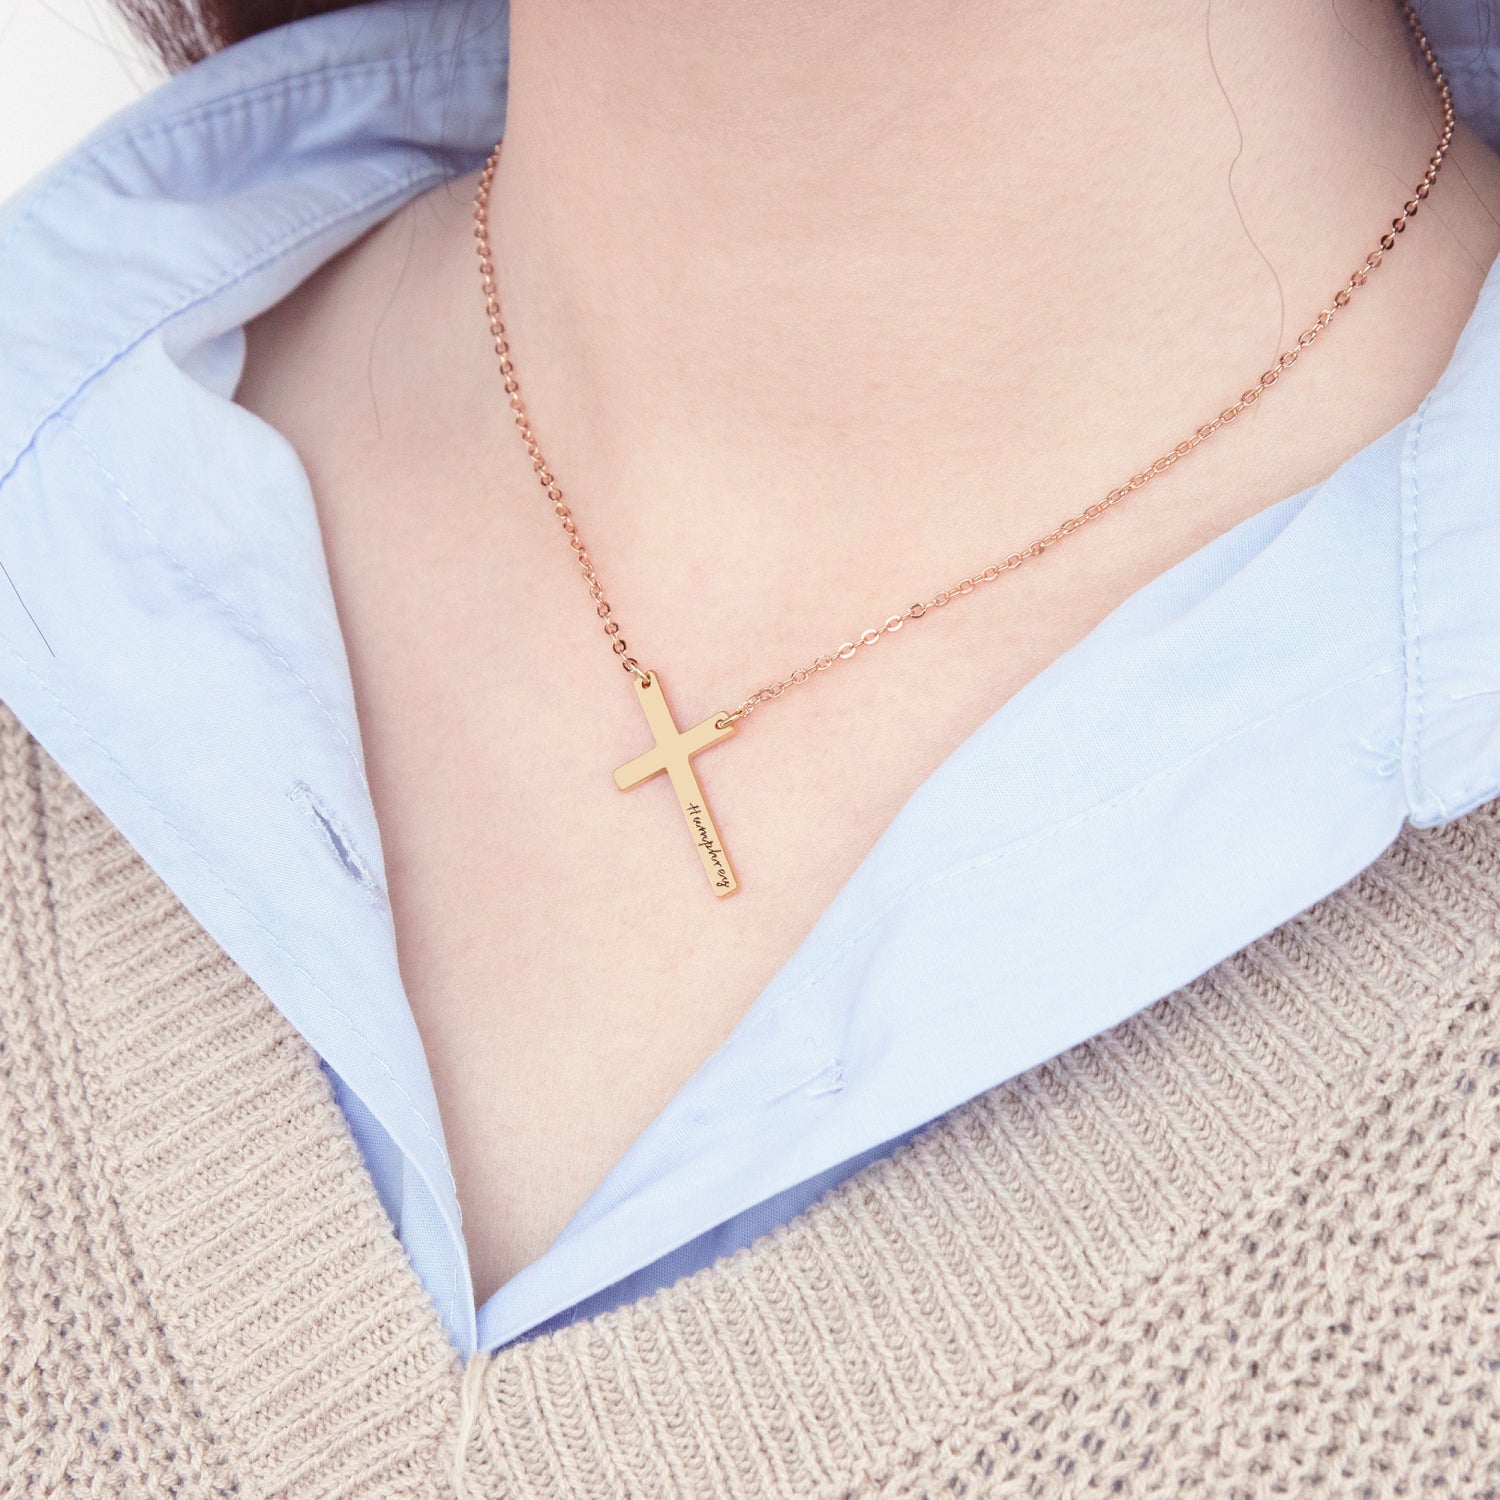 616. Cross Name Necklace